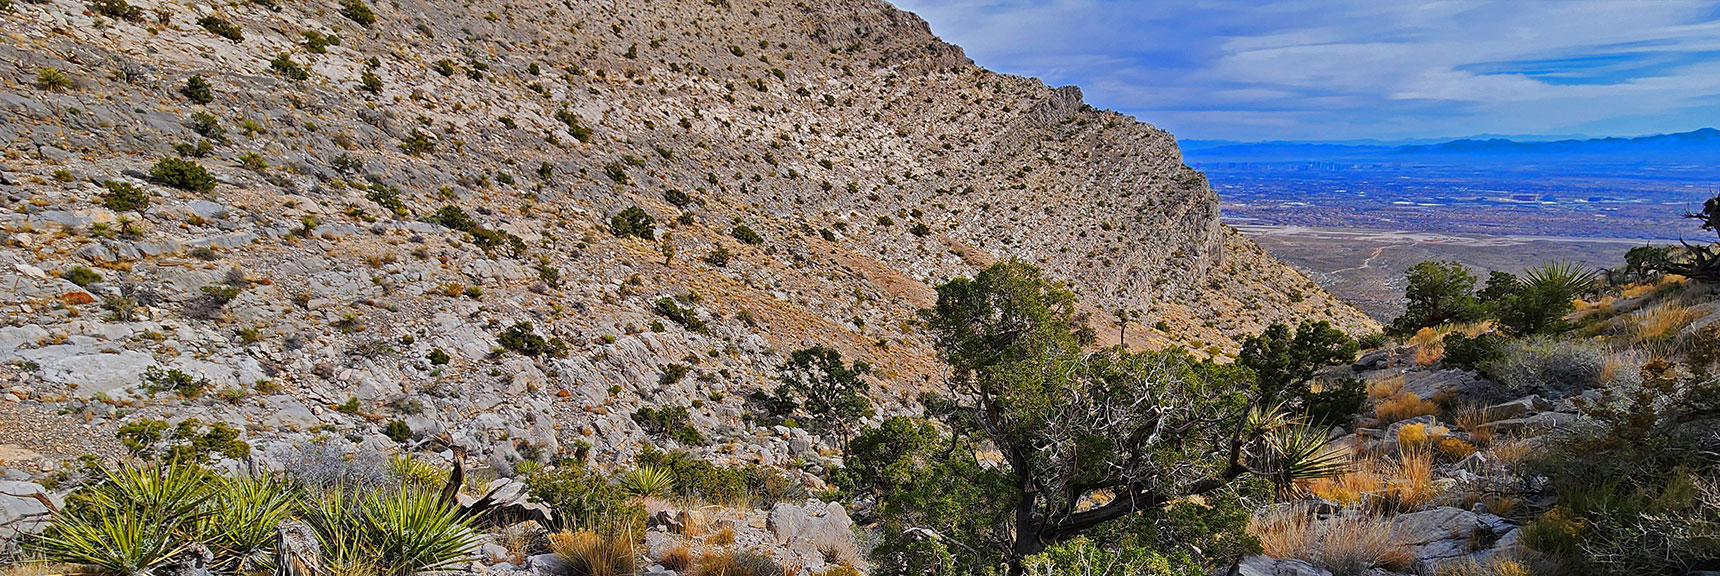 My Reference Tree Far Below in Main Gully Will Guide Will Guide Return Trip | Damsel Peak Southeastern Slope | Calico & Brownstone Basins, Nevada